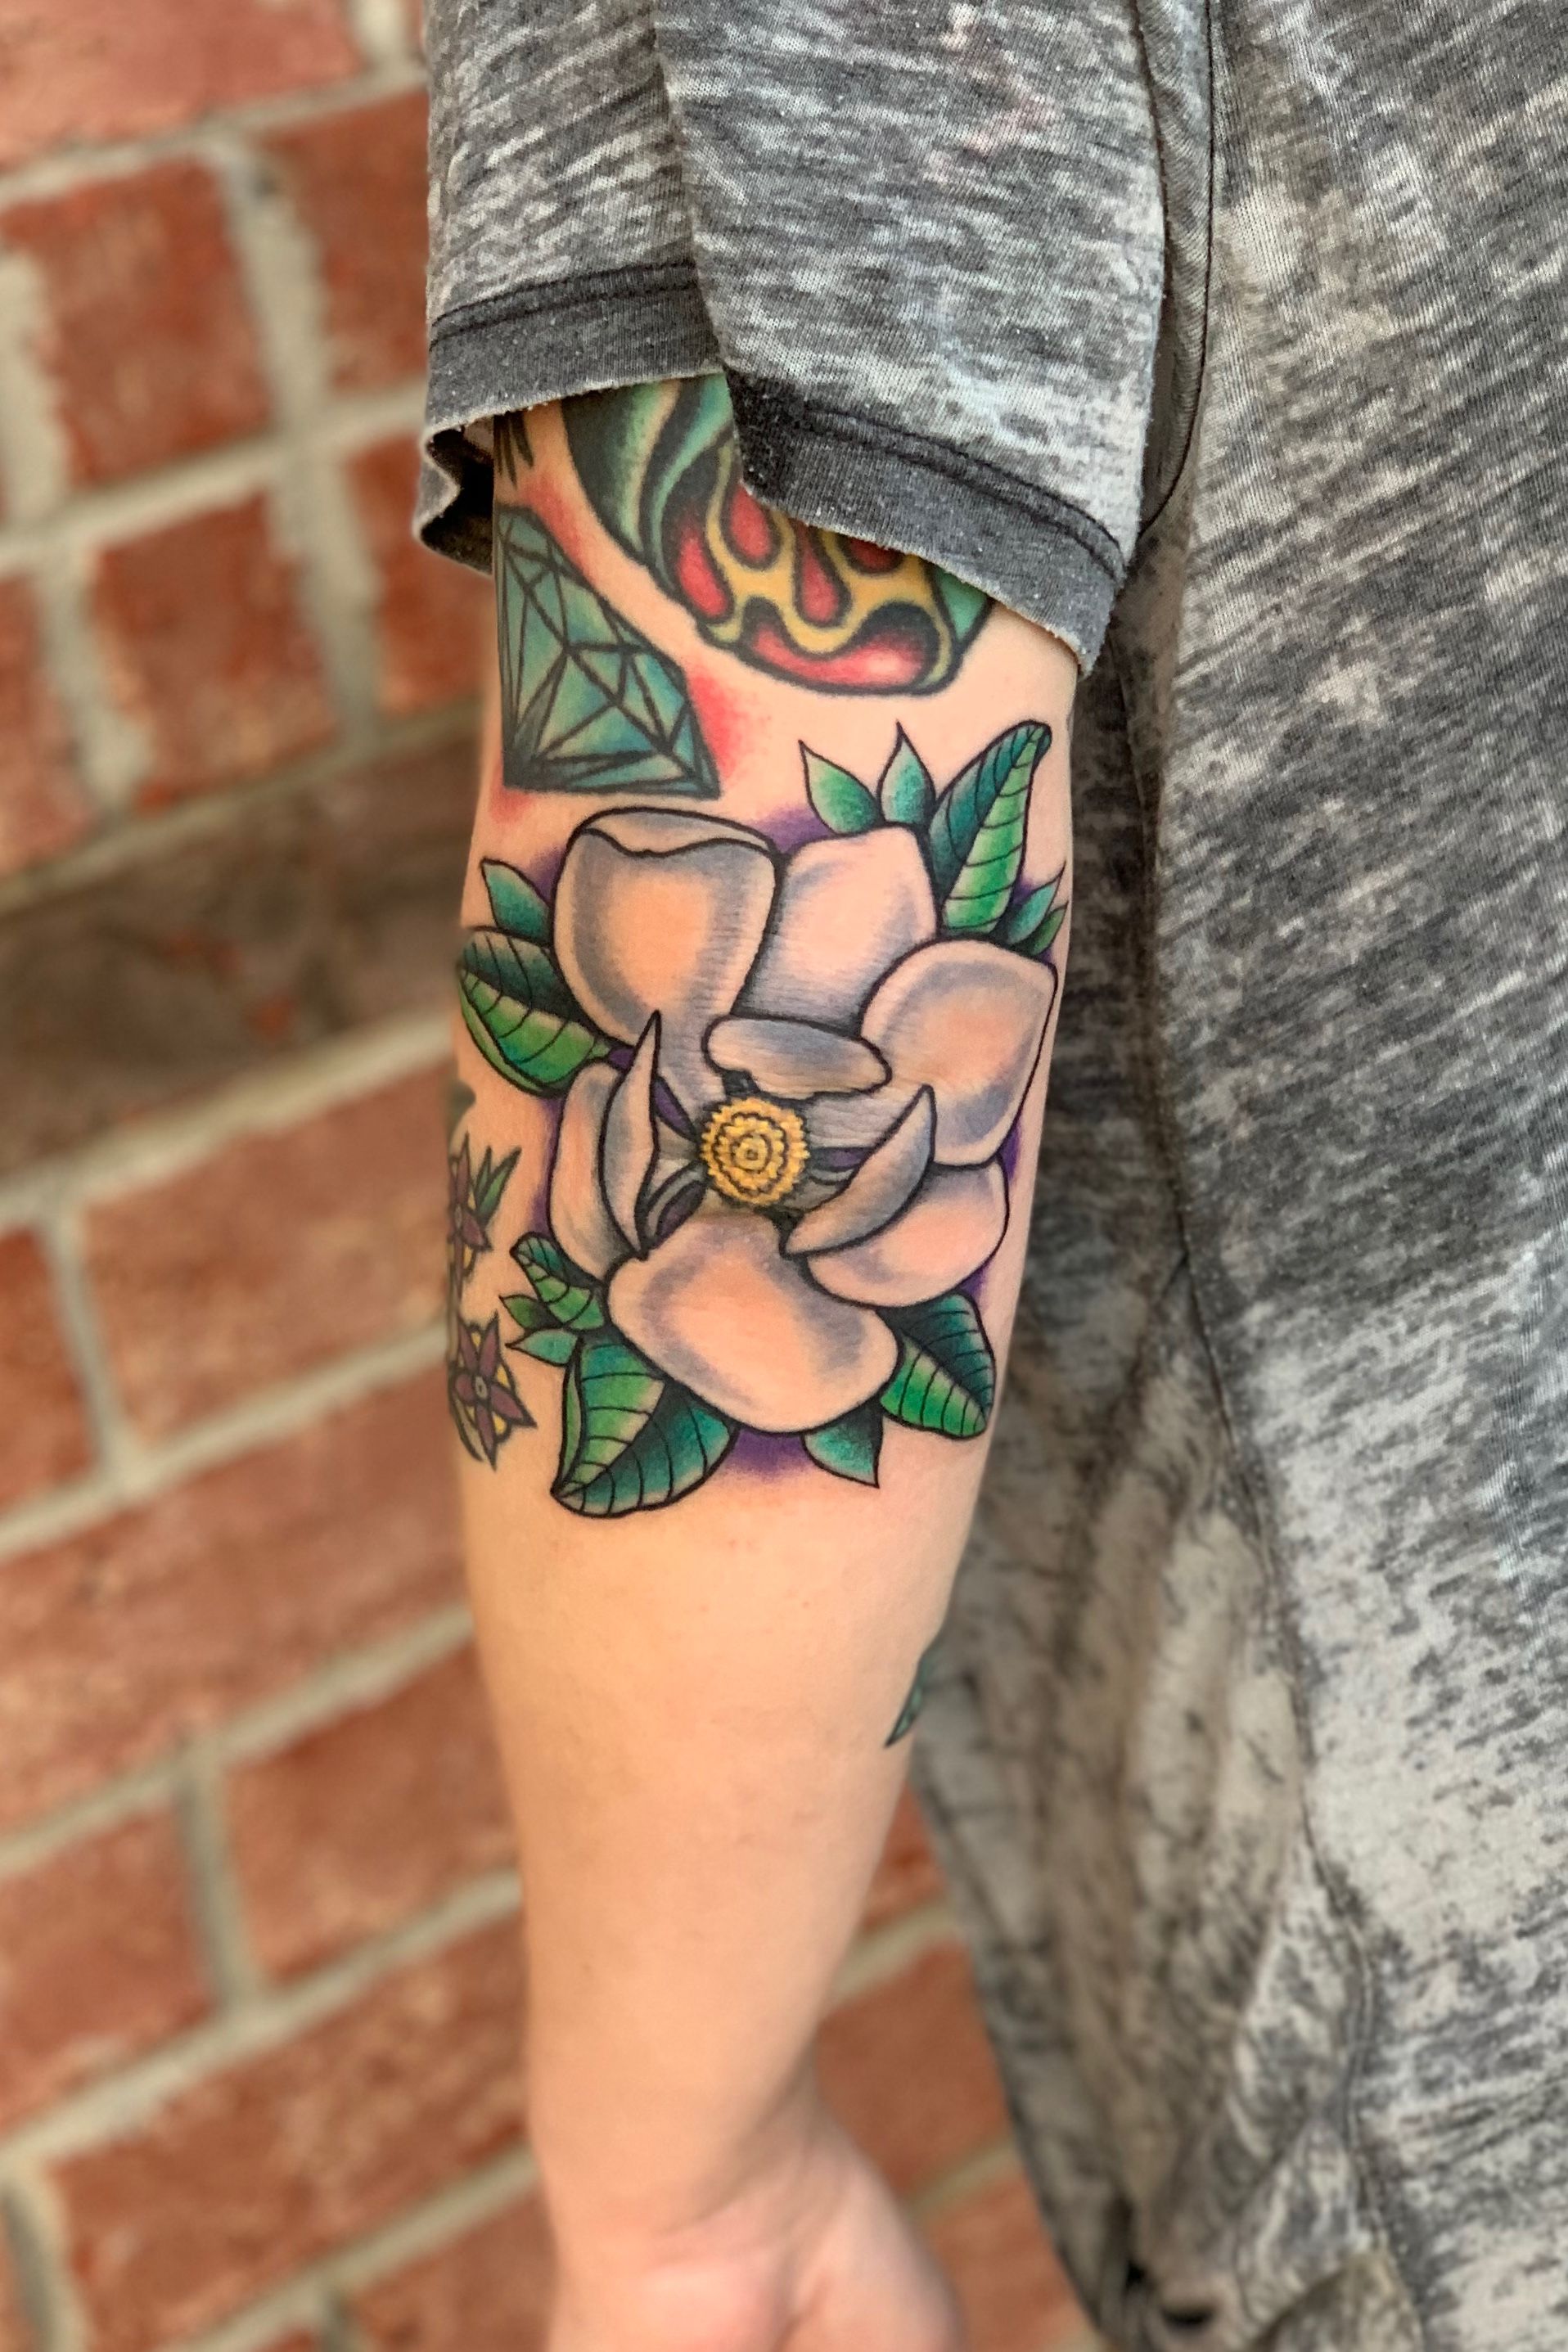 Magnolia tattoo meanings  popular questions